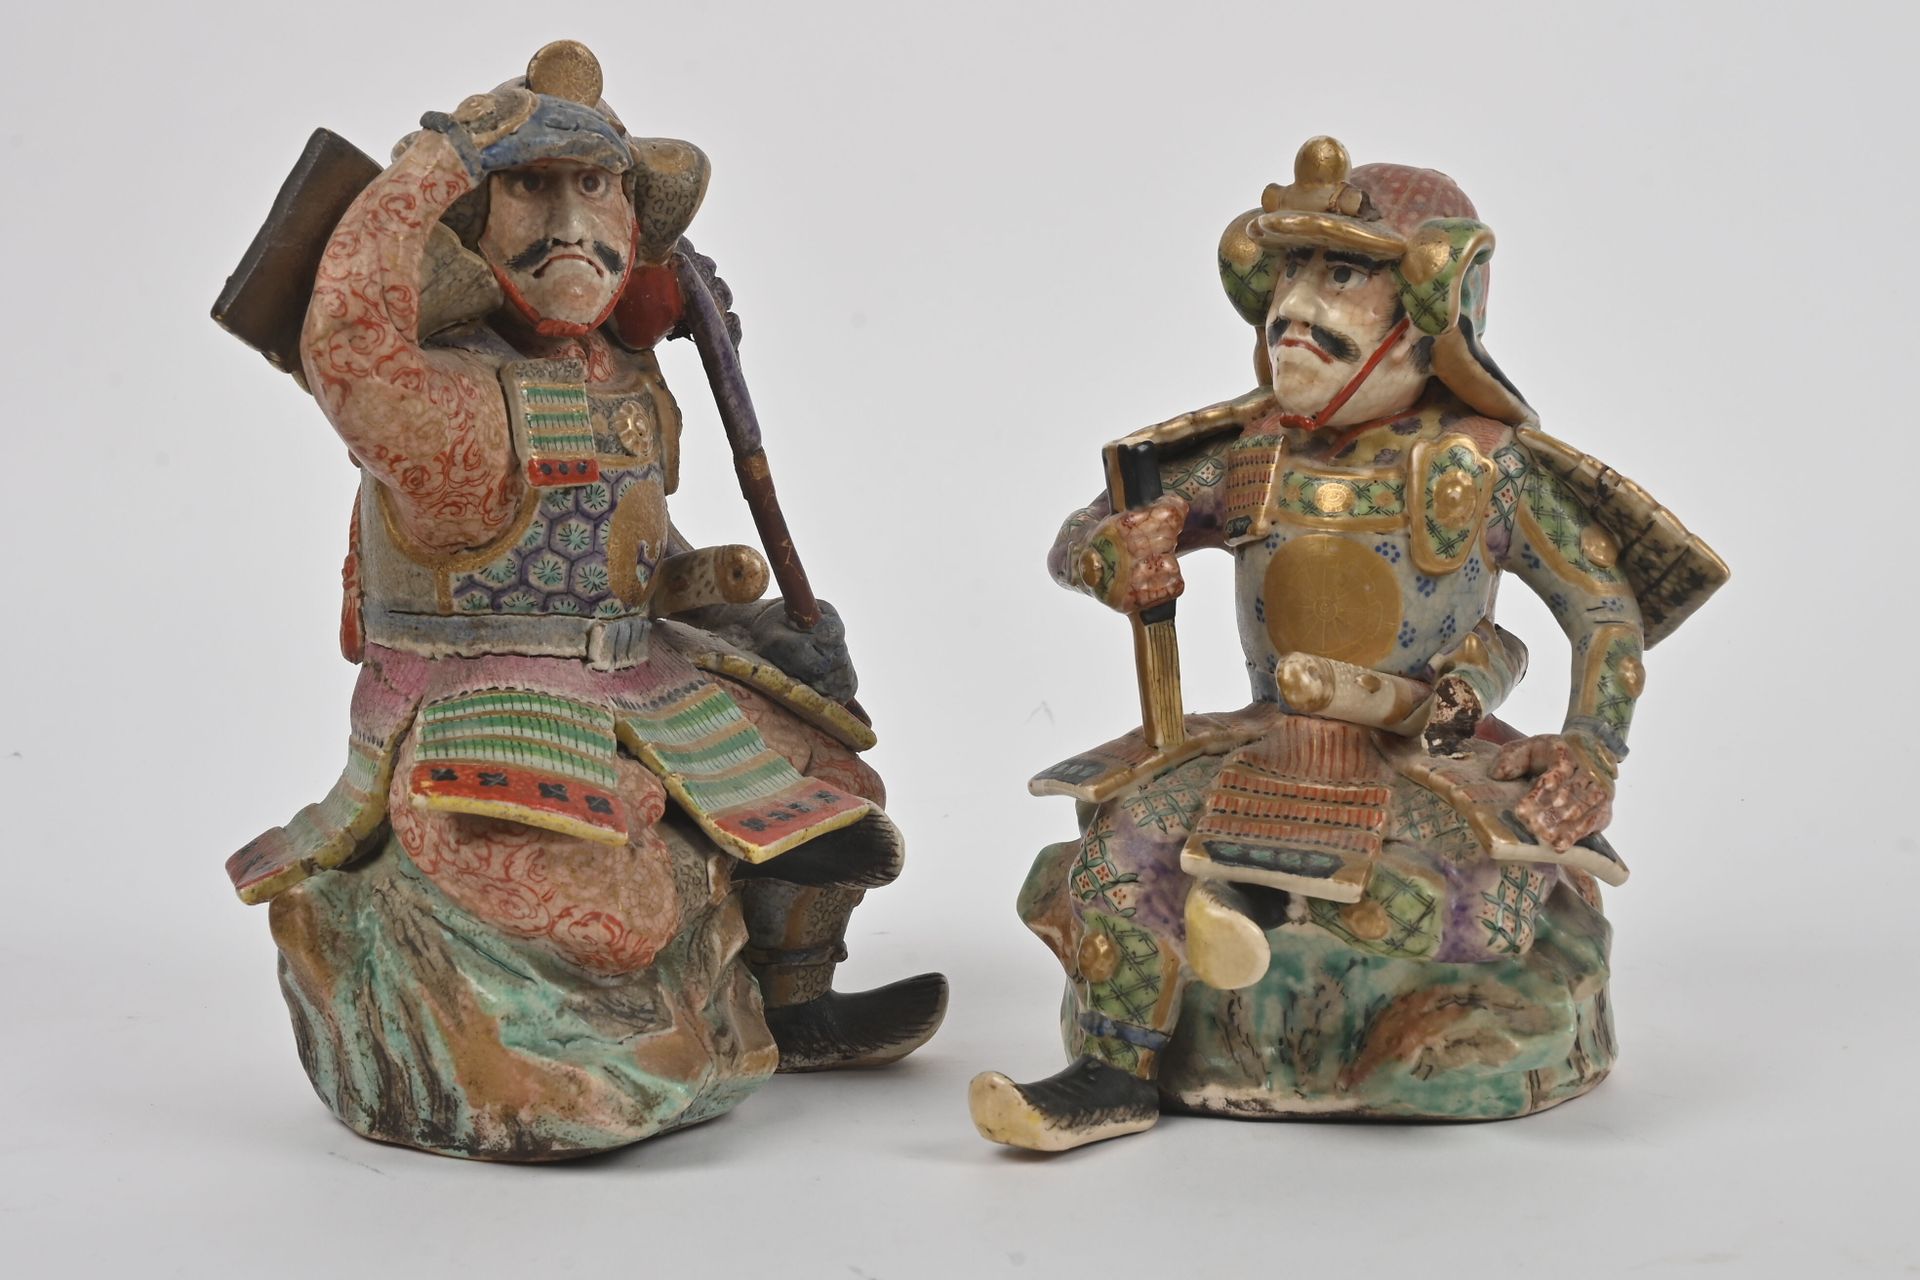 Null JAPAN - Early 20th century
Pair of polychrome porcelain statuettes, represe&hellip;